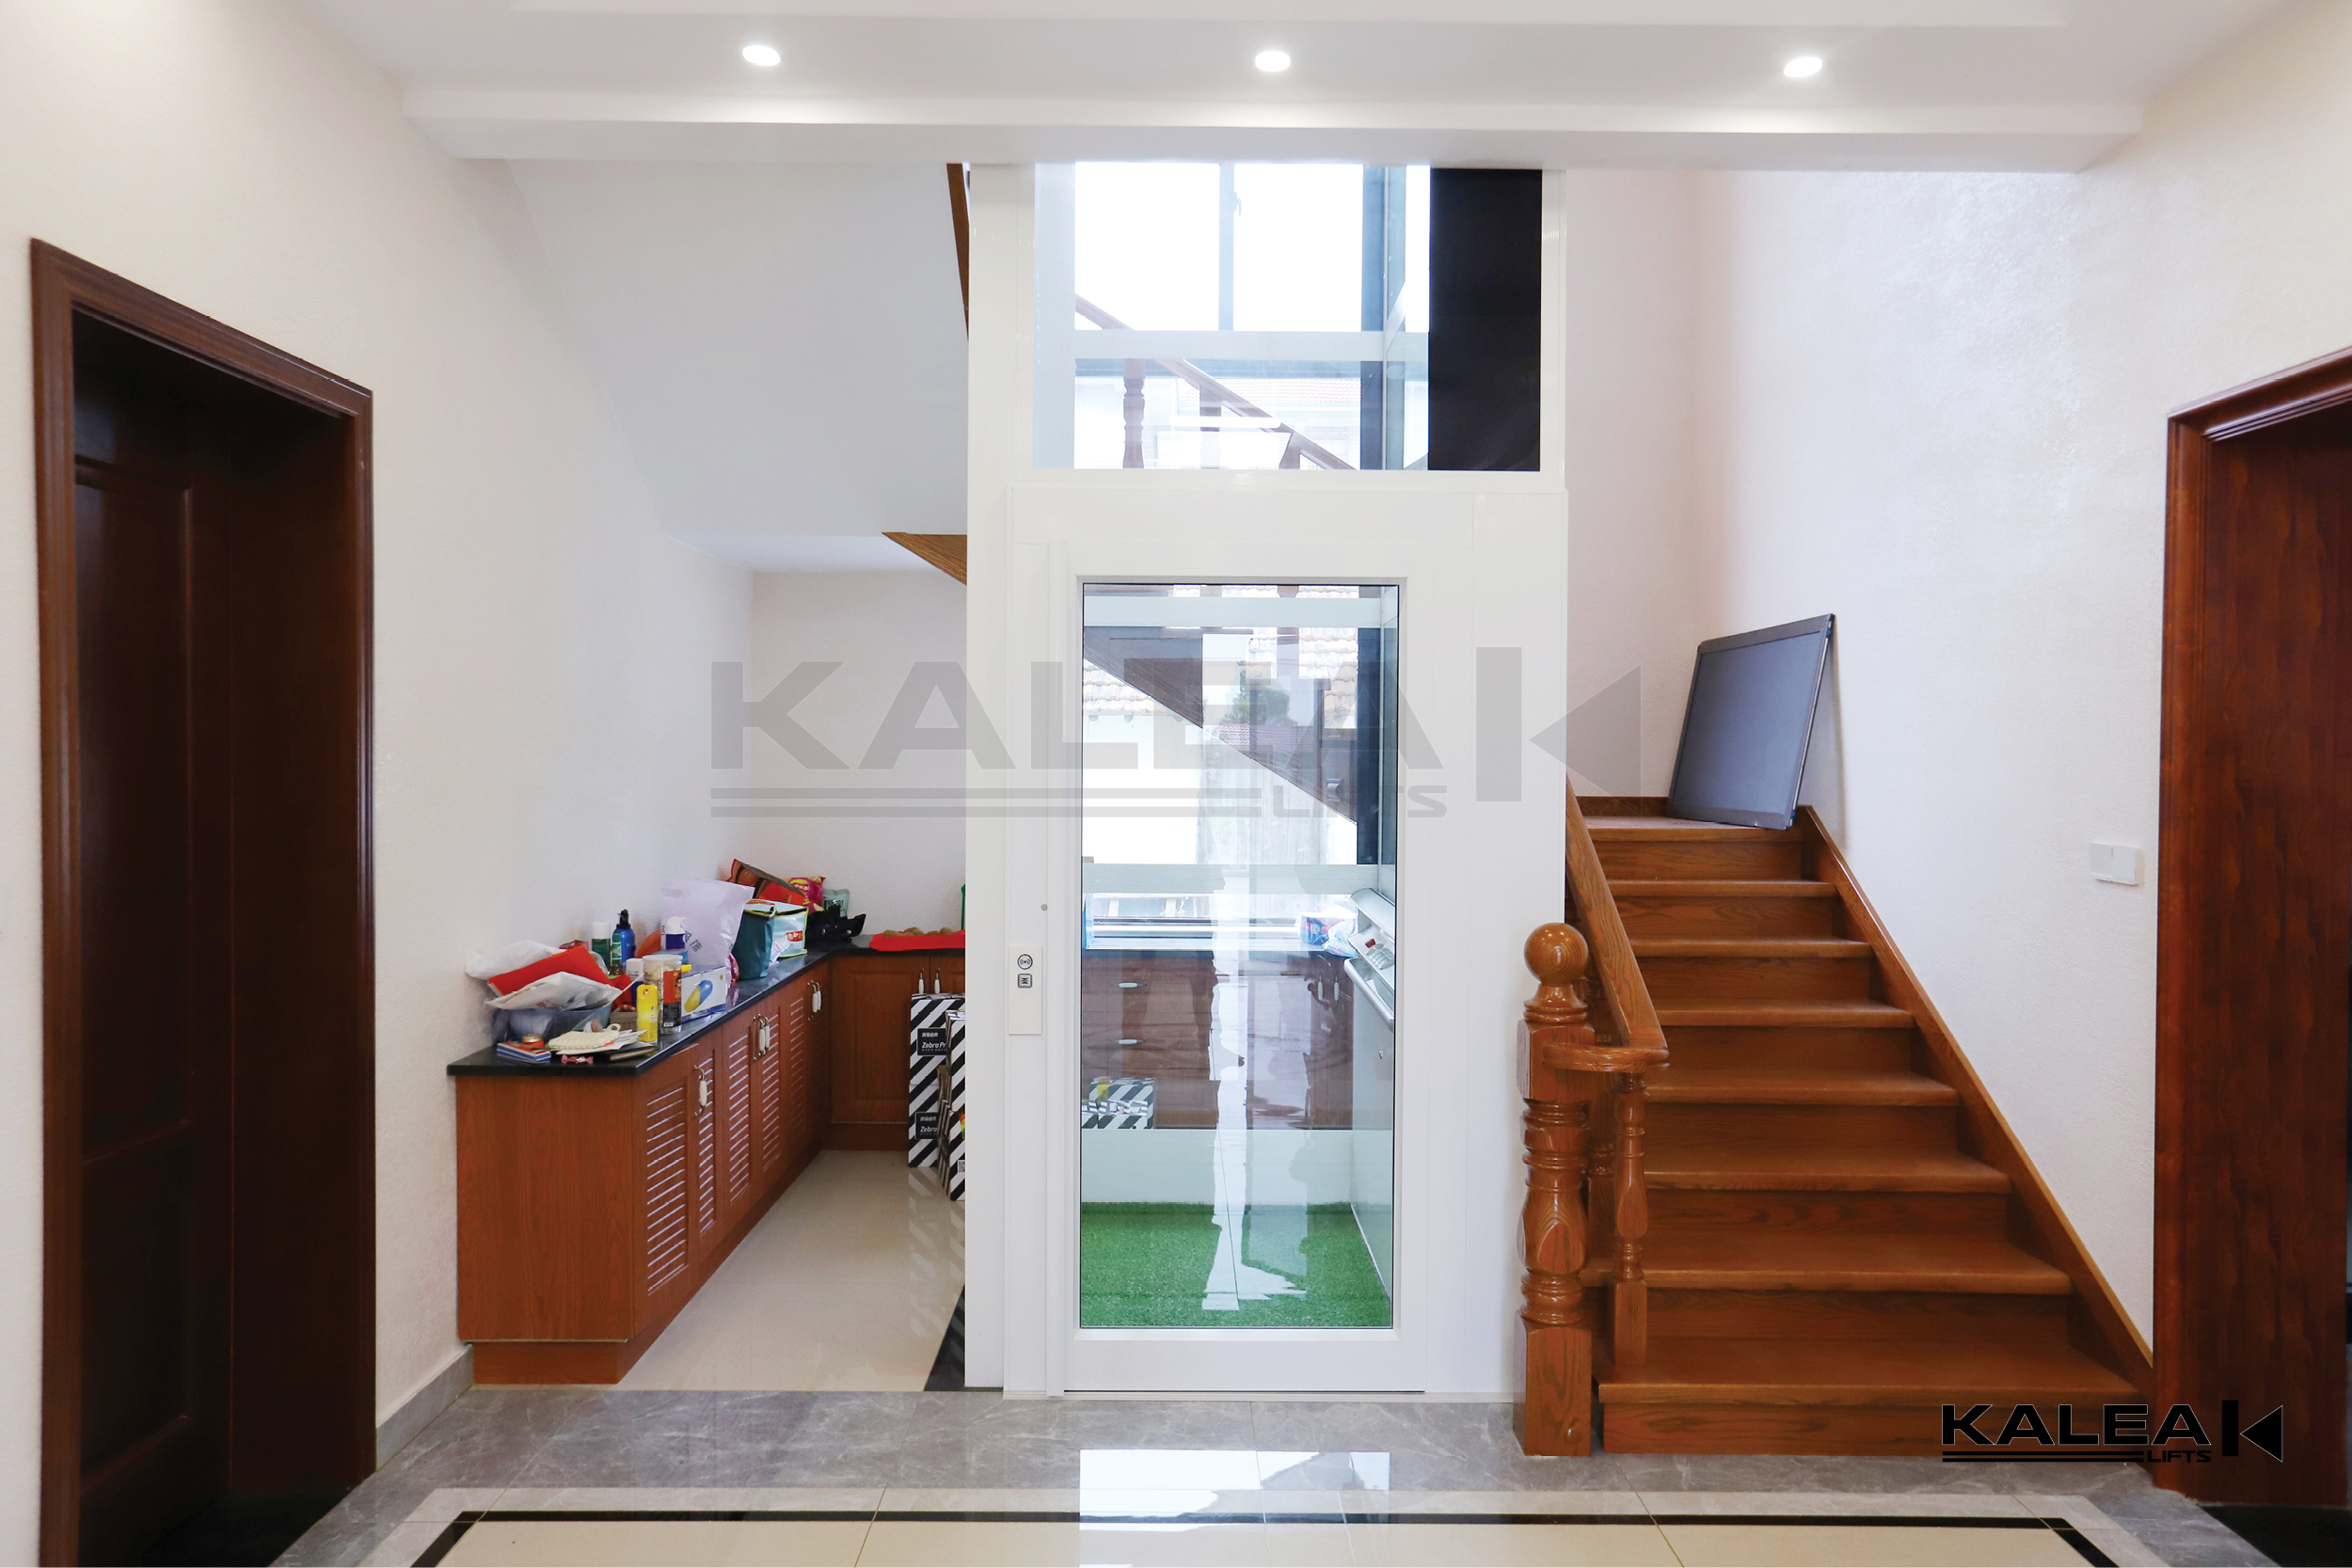 Private Home, Klassic model ,Middle of Stair, All Glass Shaft , Powder Coated White RAL9016